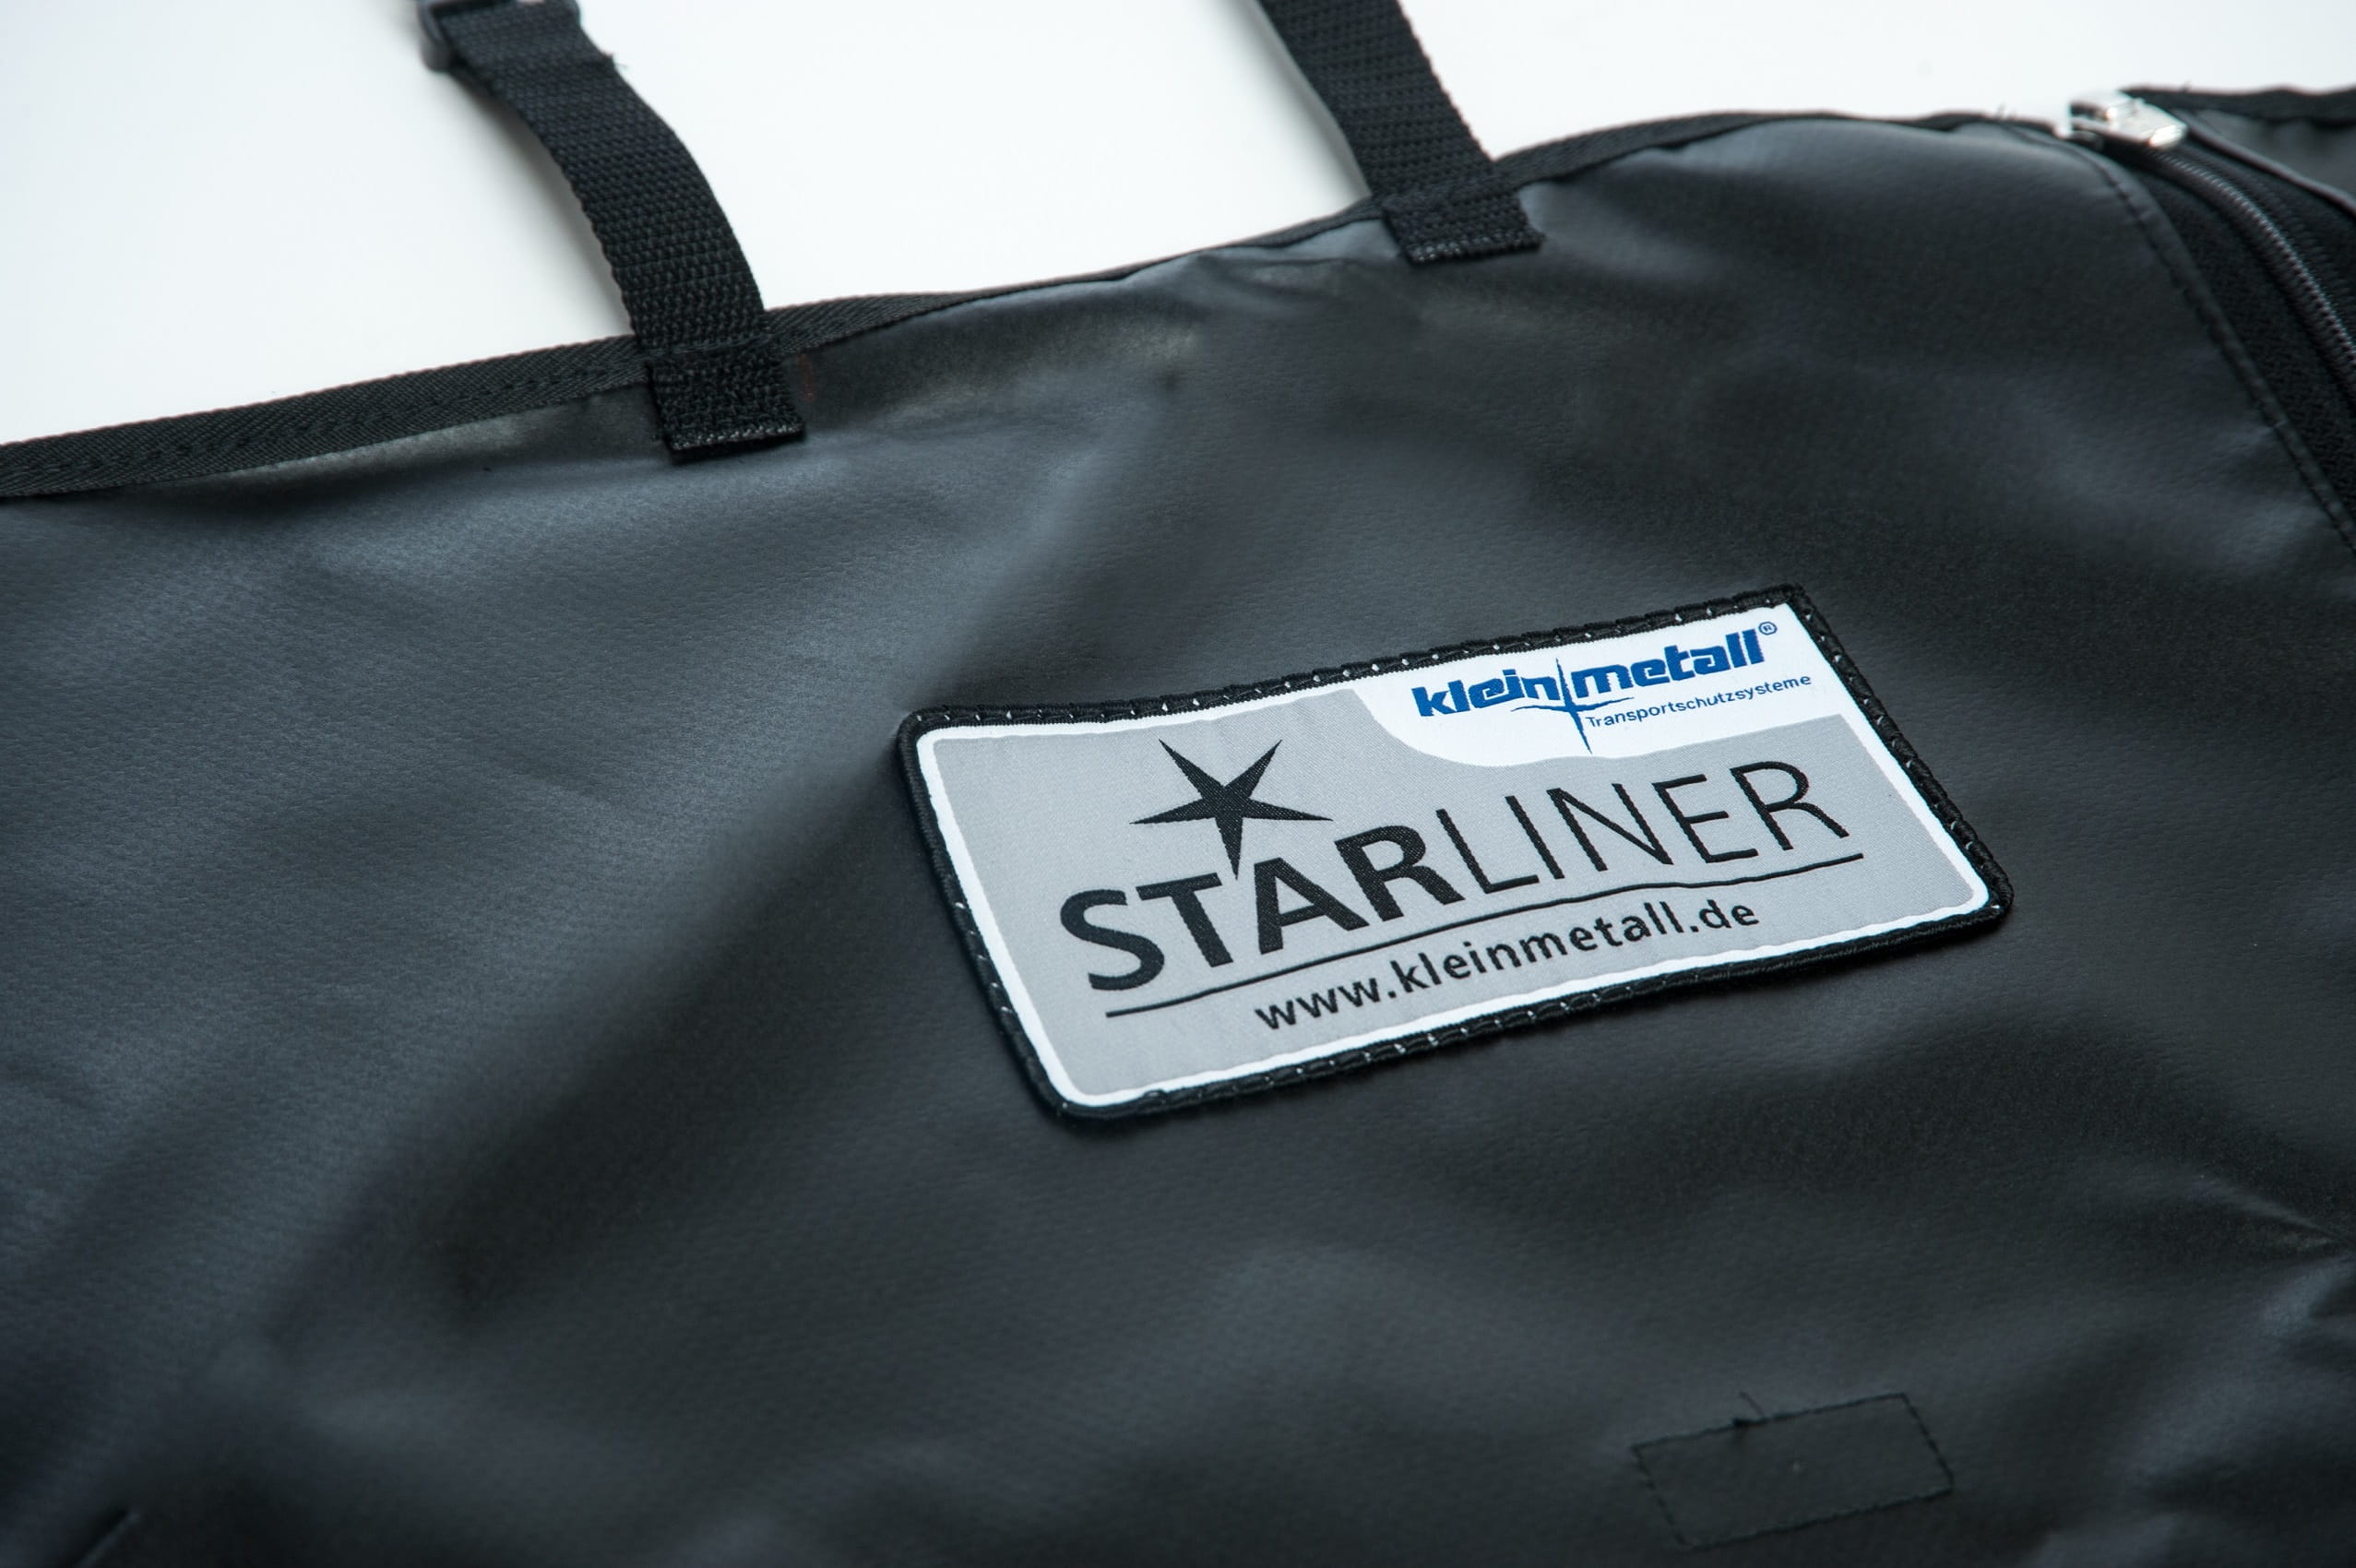 Starliner black car boot tray for VW Sharan II, Seat Alhambra II, built  since 2010